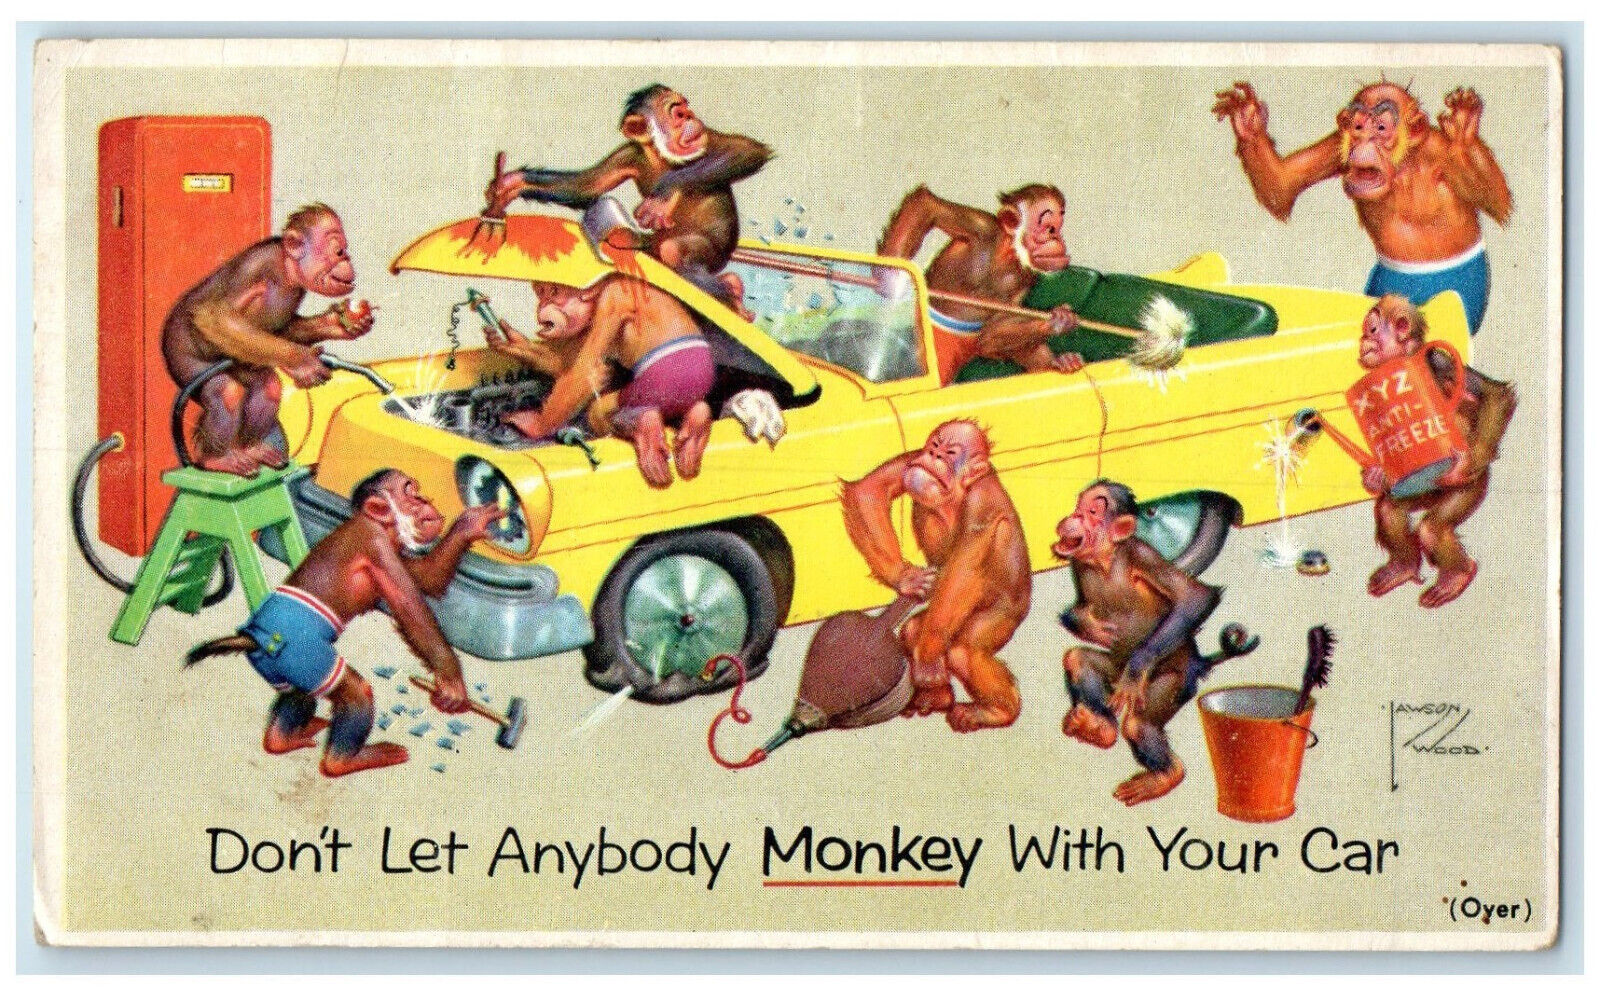 c1920's Monkey Fixing Cleaning Car Funny Preston Advertising Forrest IL Postcard